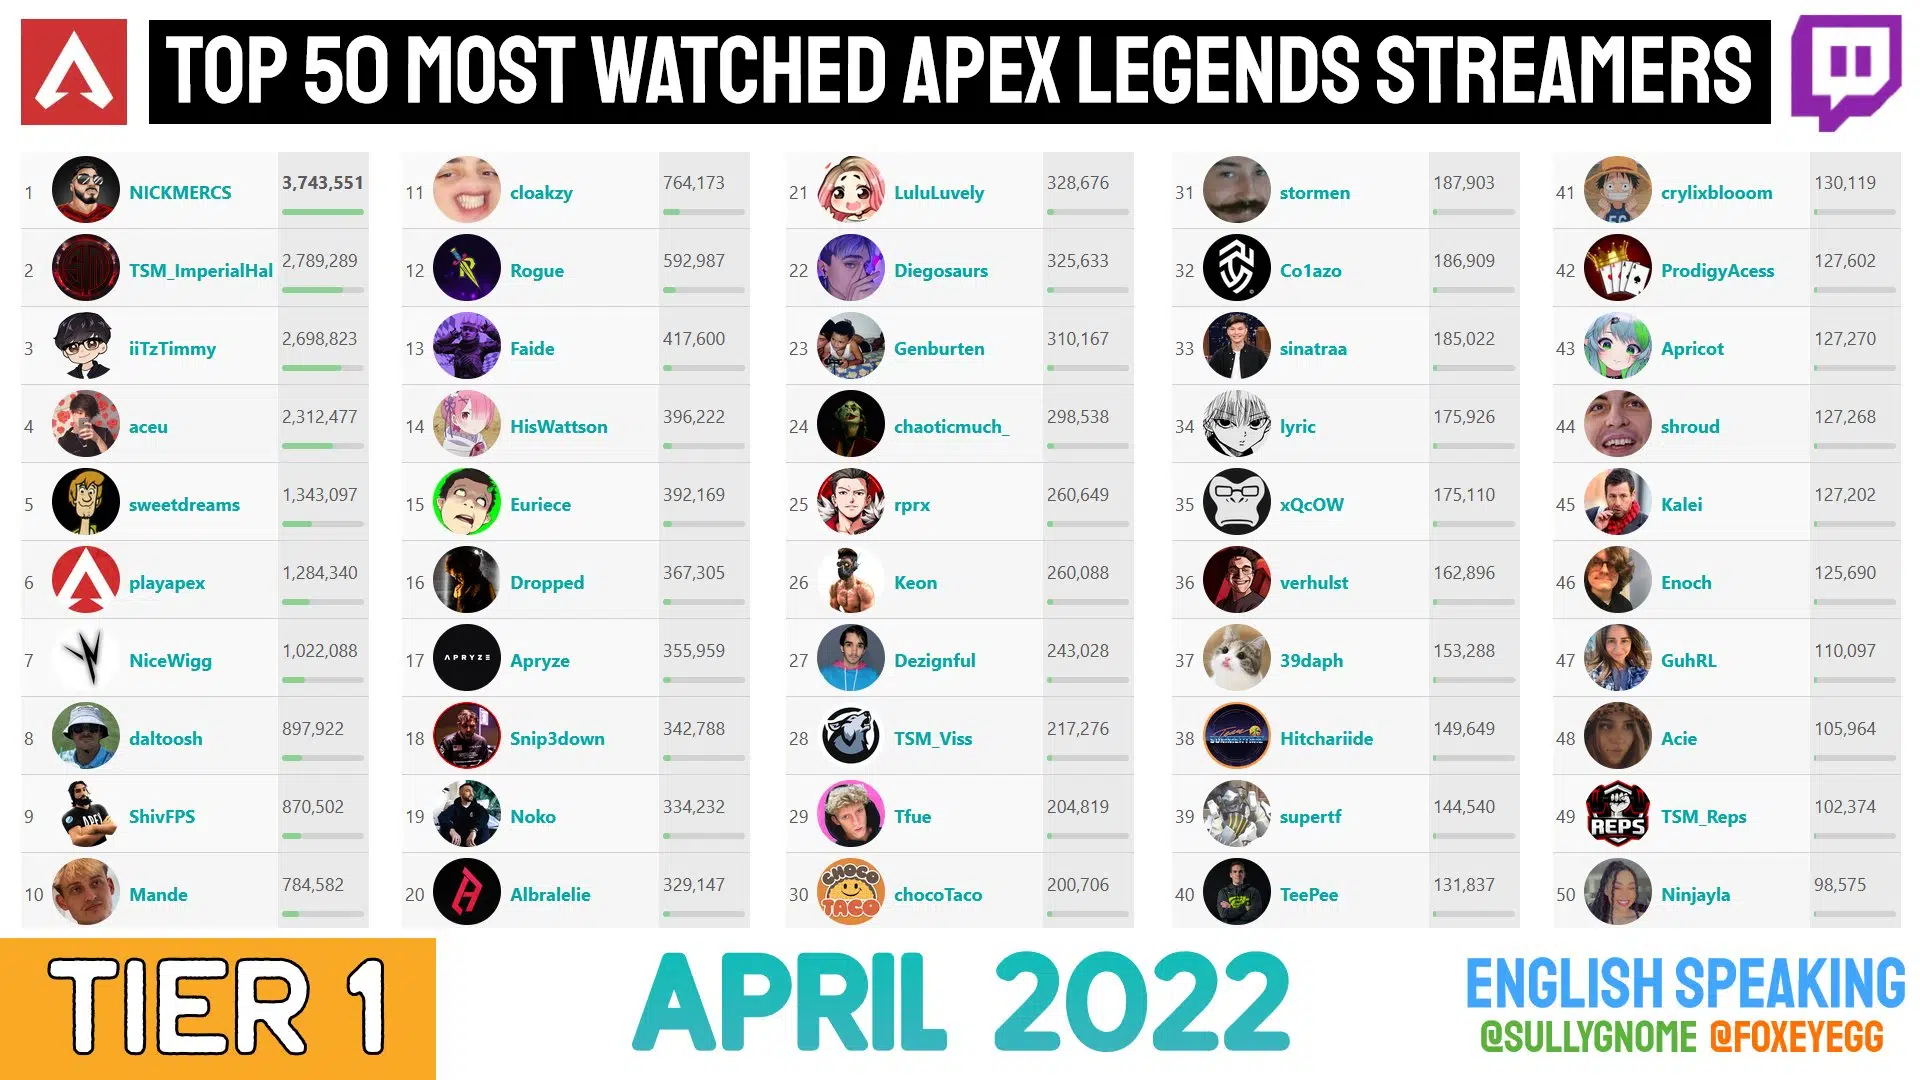 NICKMERCS on Top 50 Most Watched Apex Legends Streamers April 2022 | Source: Twitter